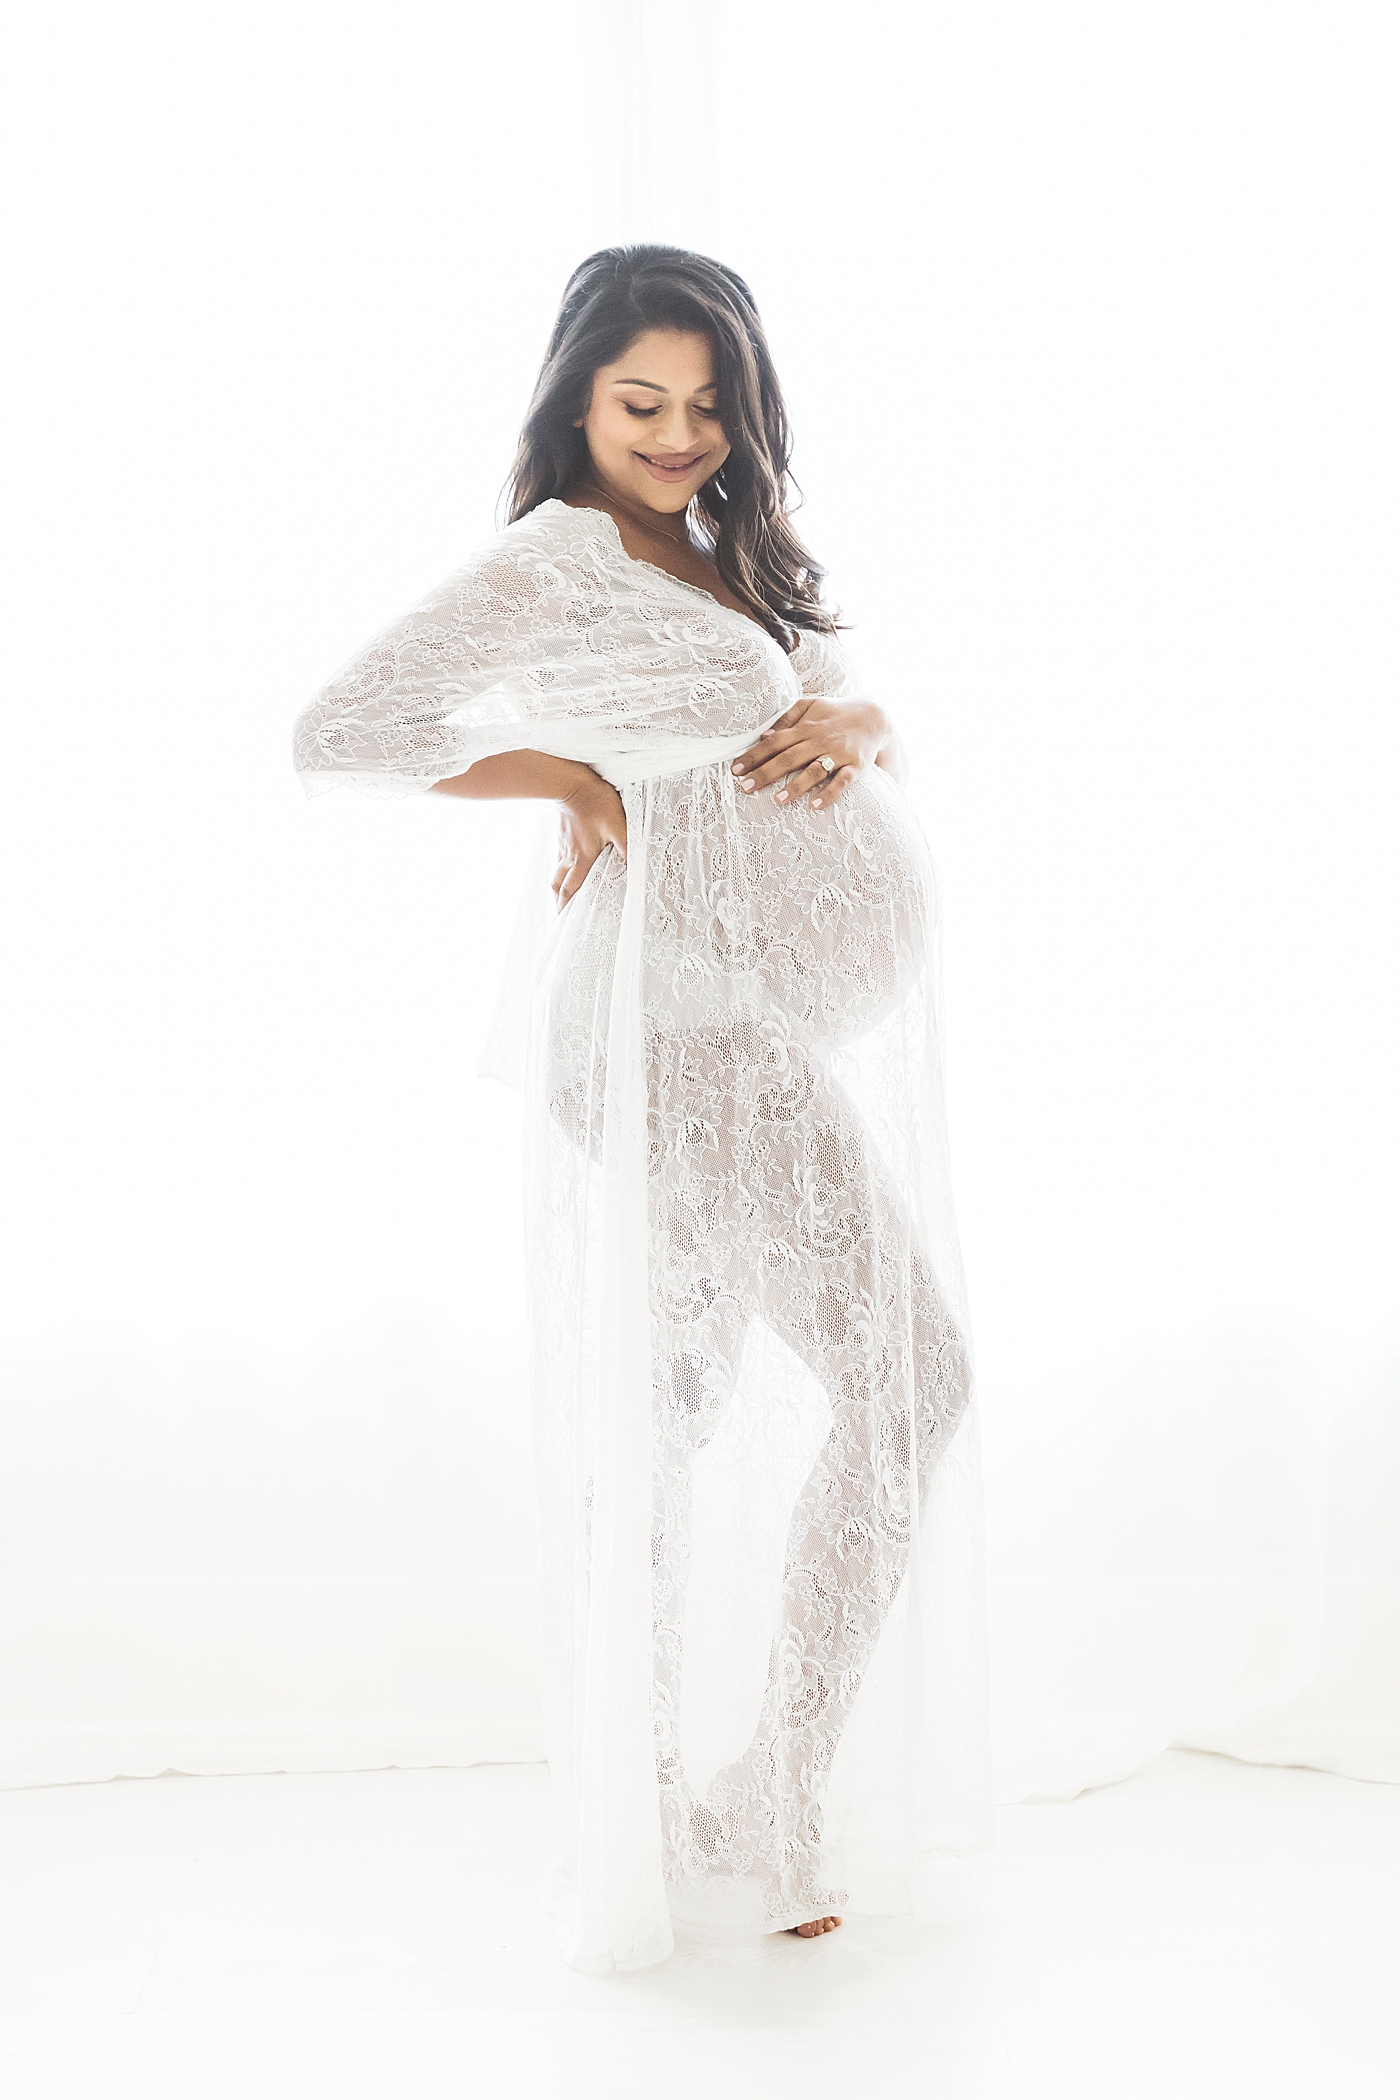 Pregnant mama in a beautiful, white lace dress. Photo by Fresh Light Photography.